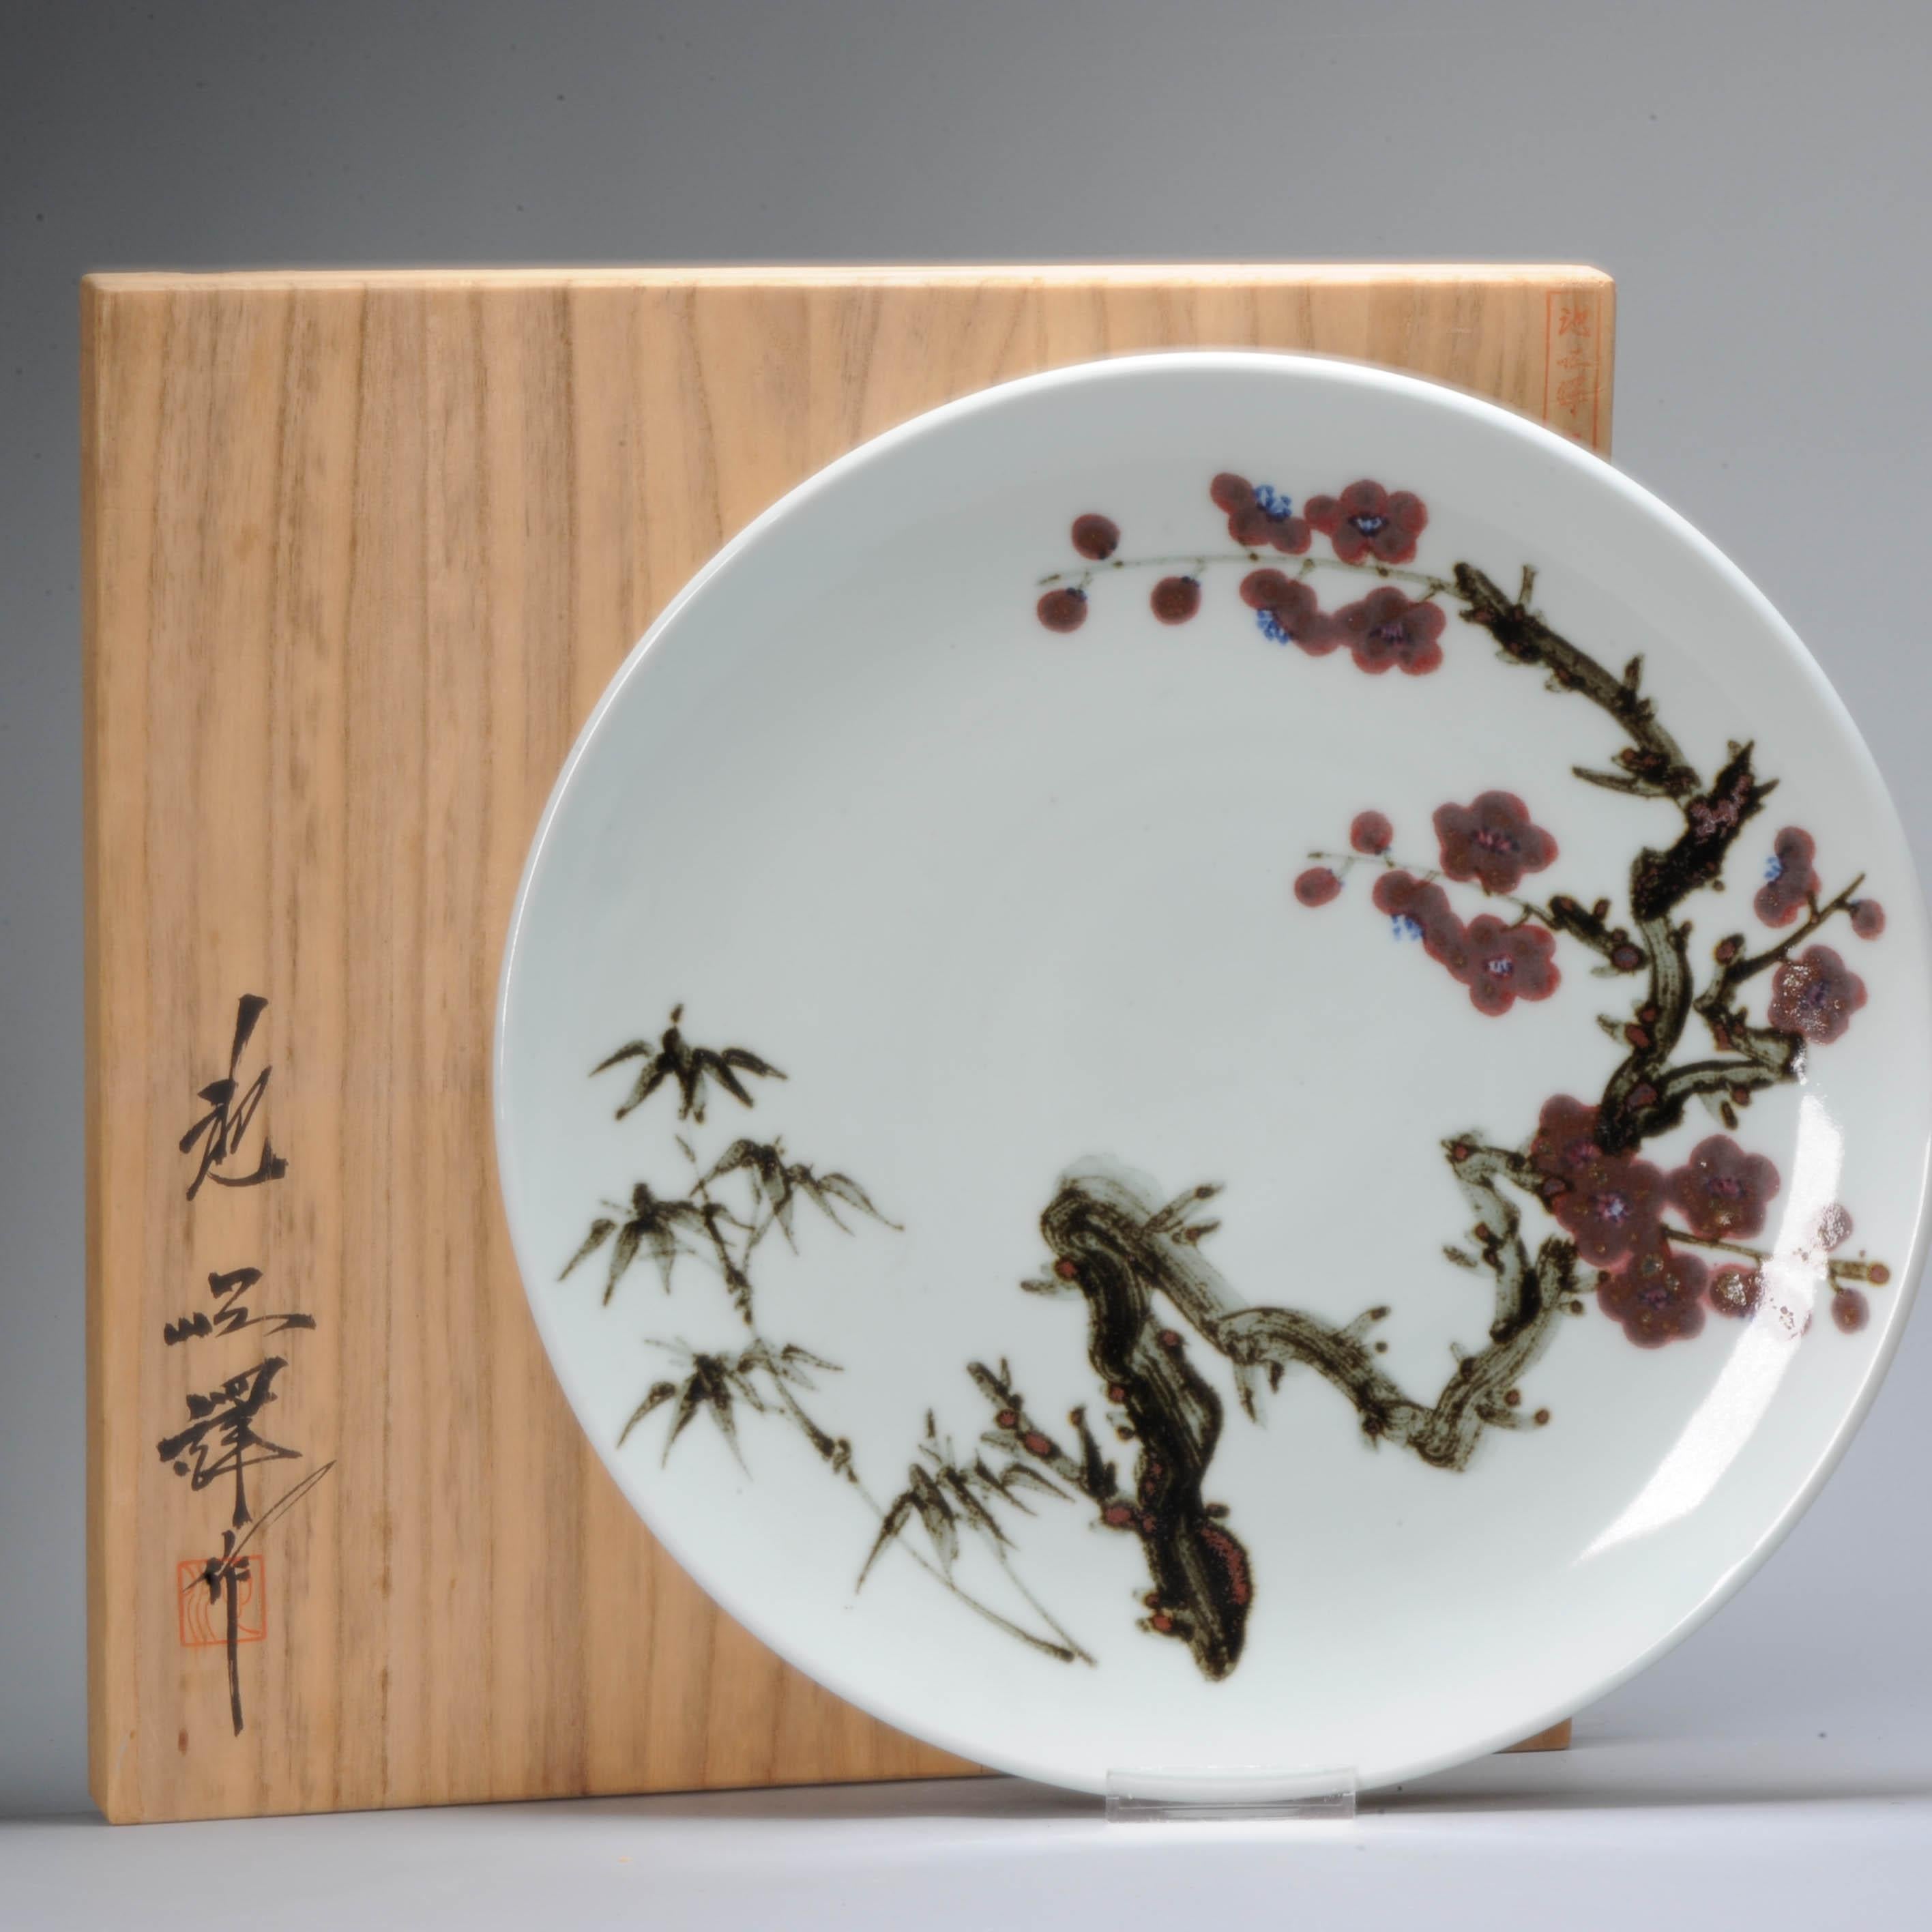 Sharing with you this Korean Porcelain 20th century dish. A unique piece.